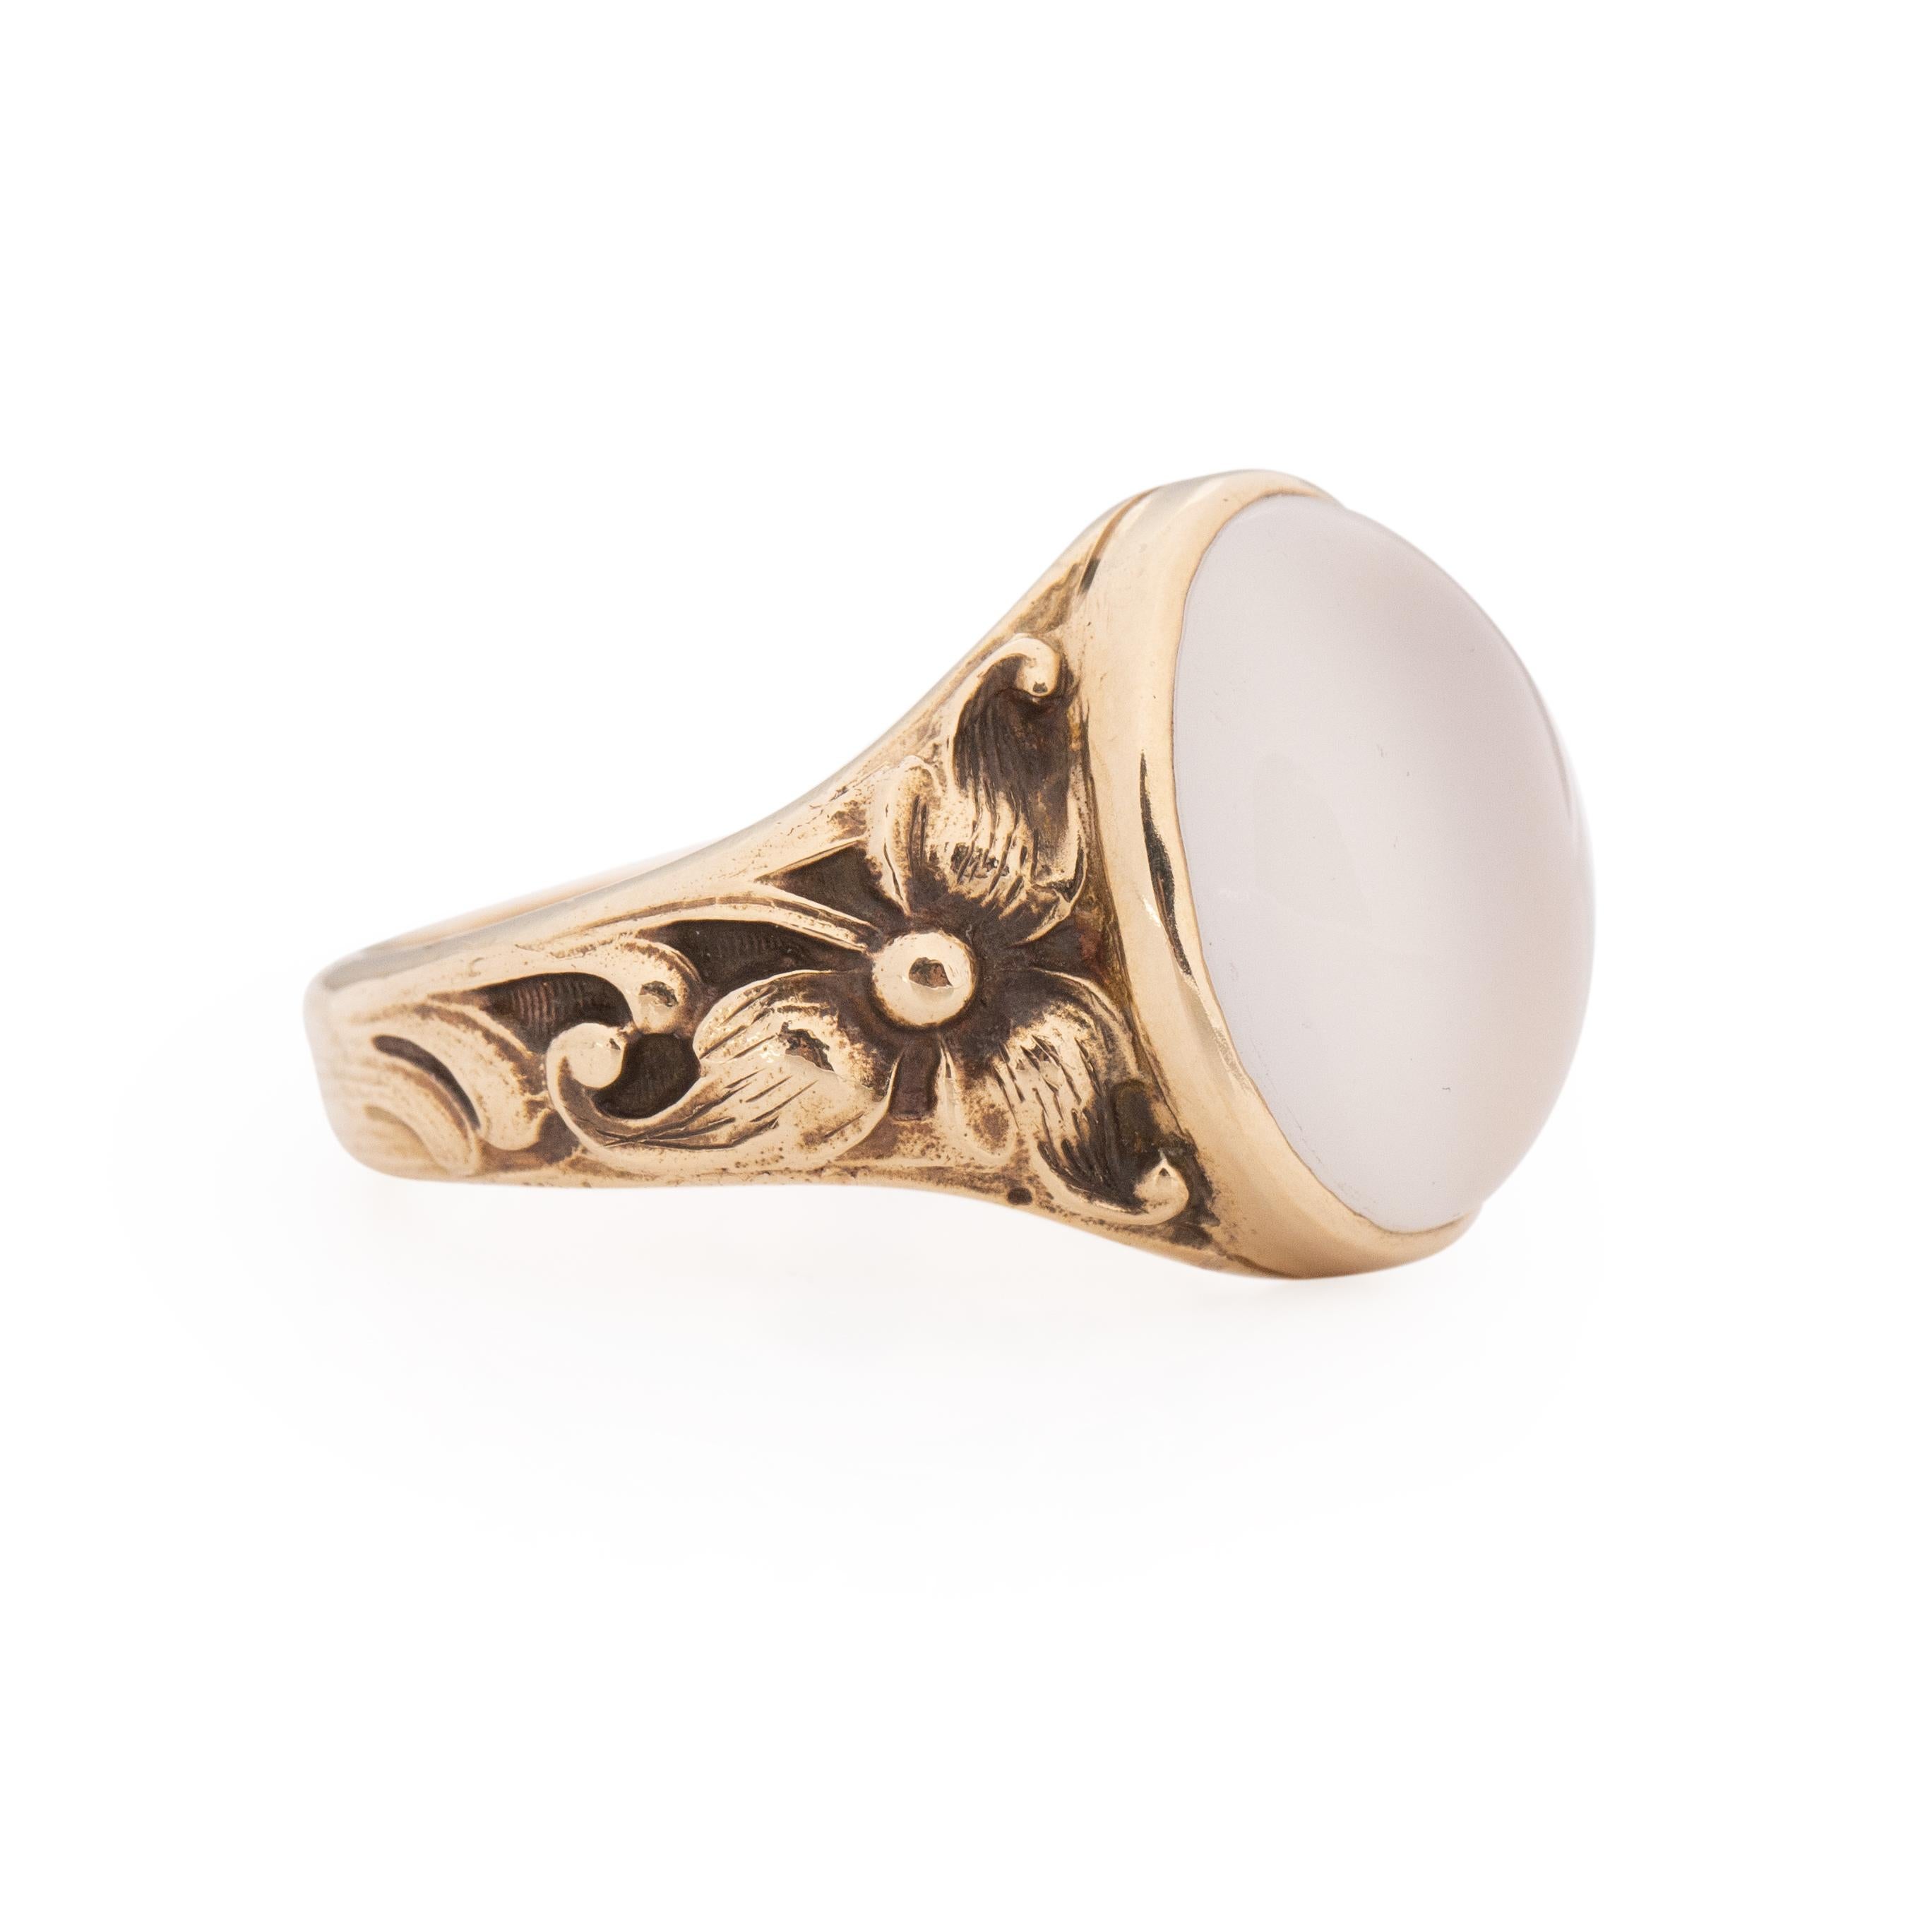 This Victorian beauty is a true one of a kind piece. Crafted in 14K yellow gold along the shanks are two detailed flowers that are reminiscent of the Michigan state flower the Trillium, a elegant three pedaled white flower that is considered